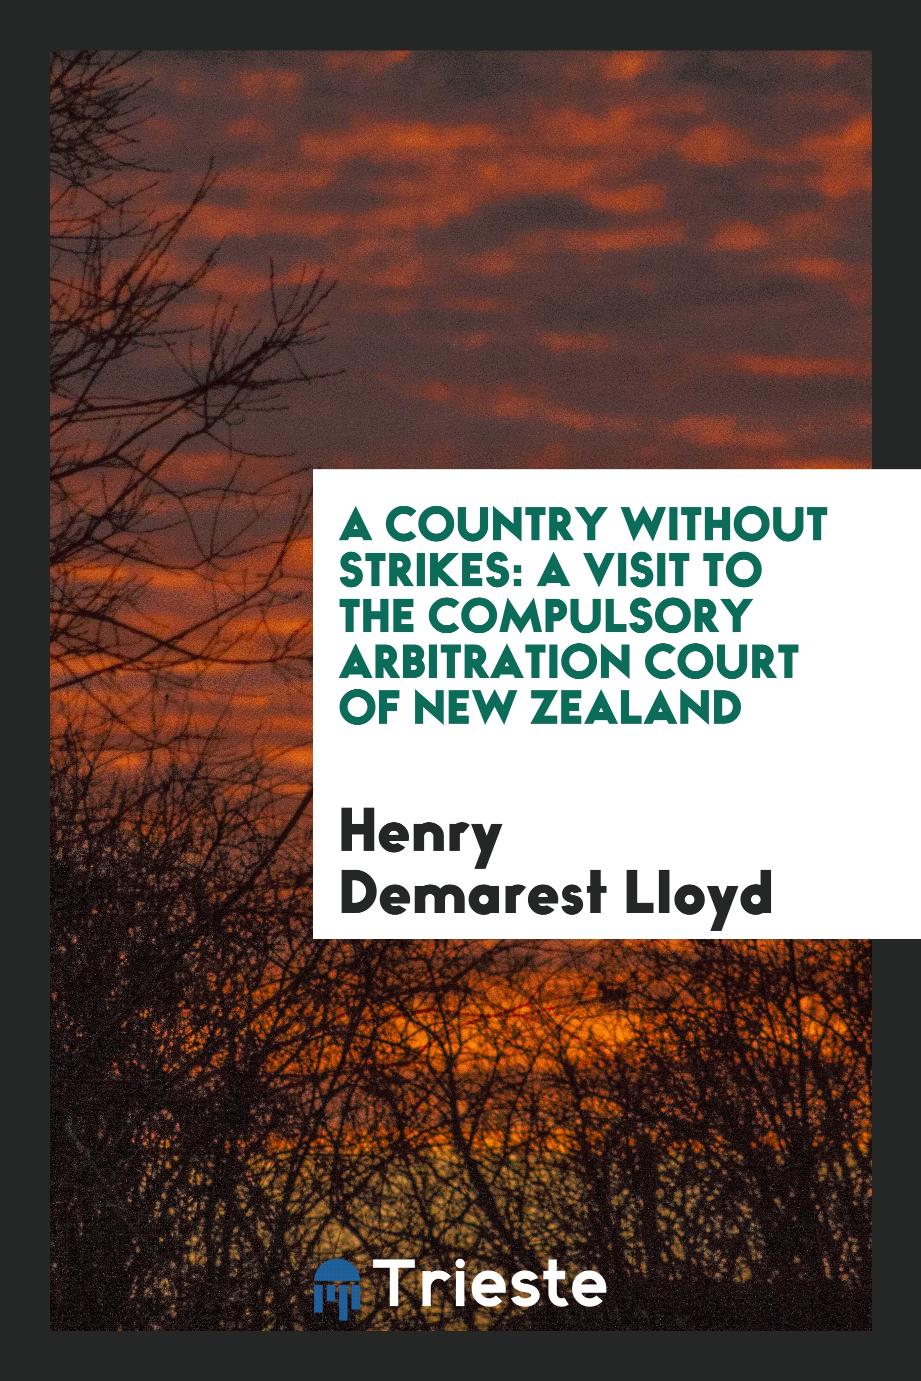 A Country without Strikes: A Visit to the Compulsory Arbitration Court of New Zealand